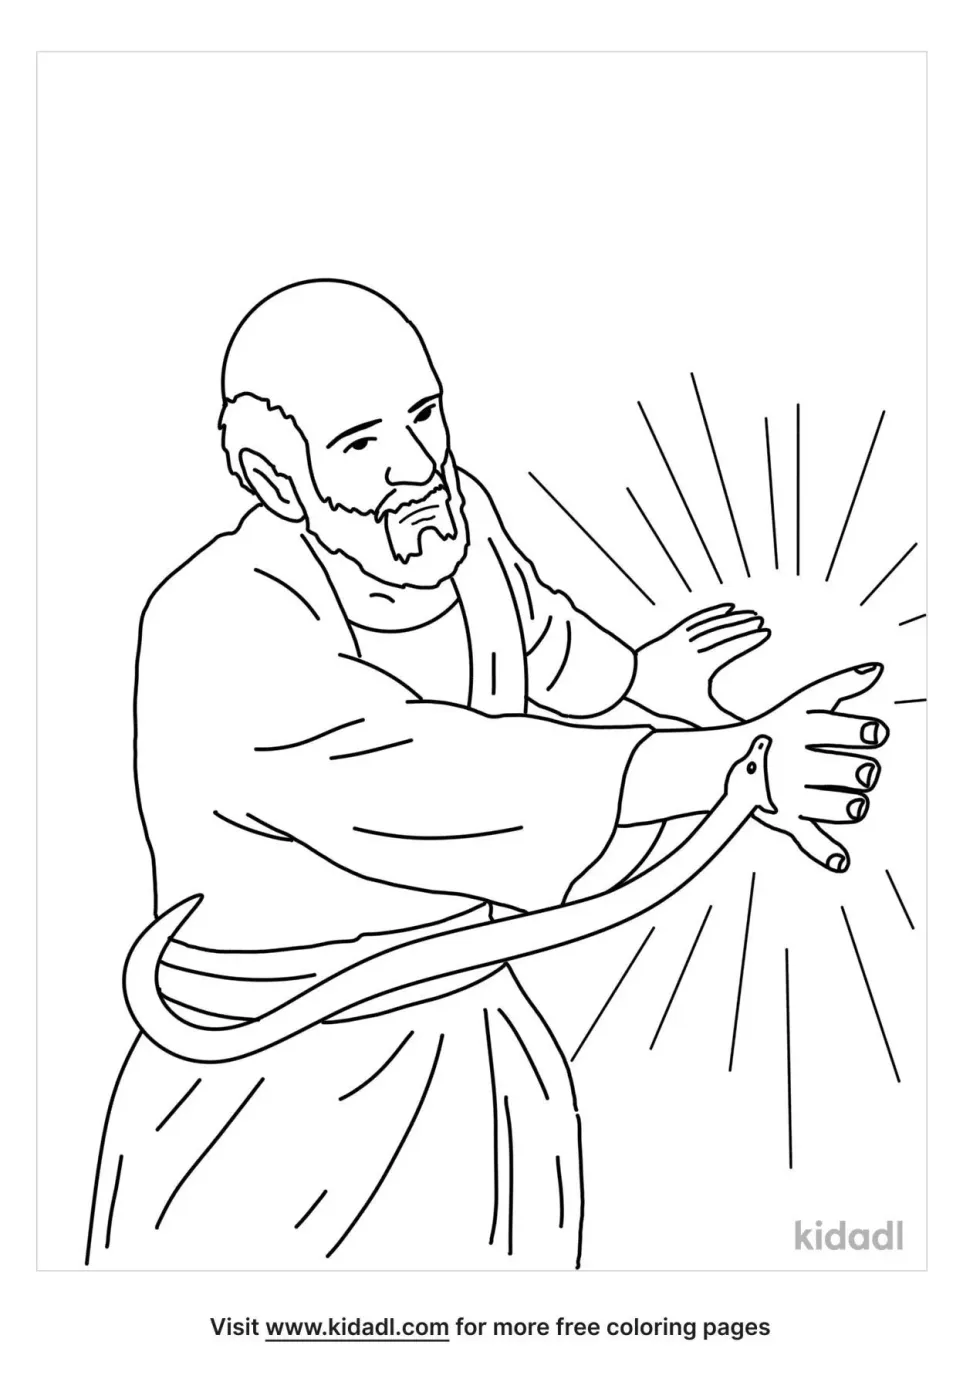 Paul Bit By Snake Coloring Page